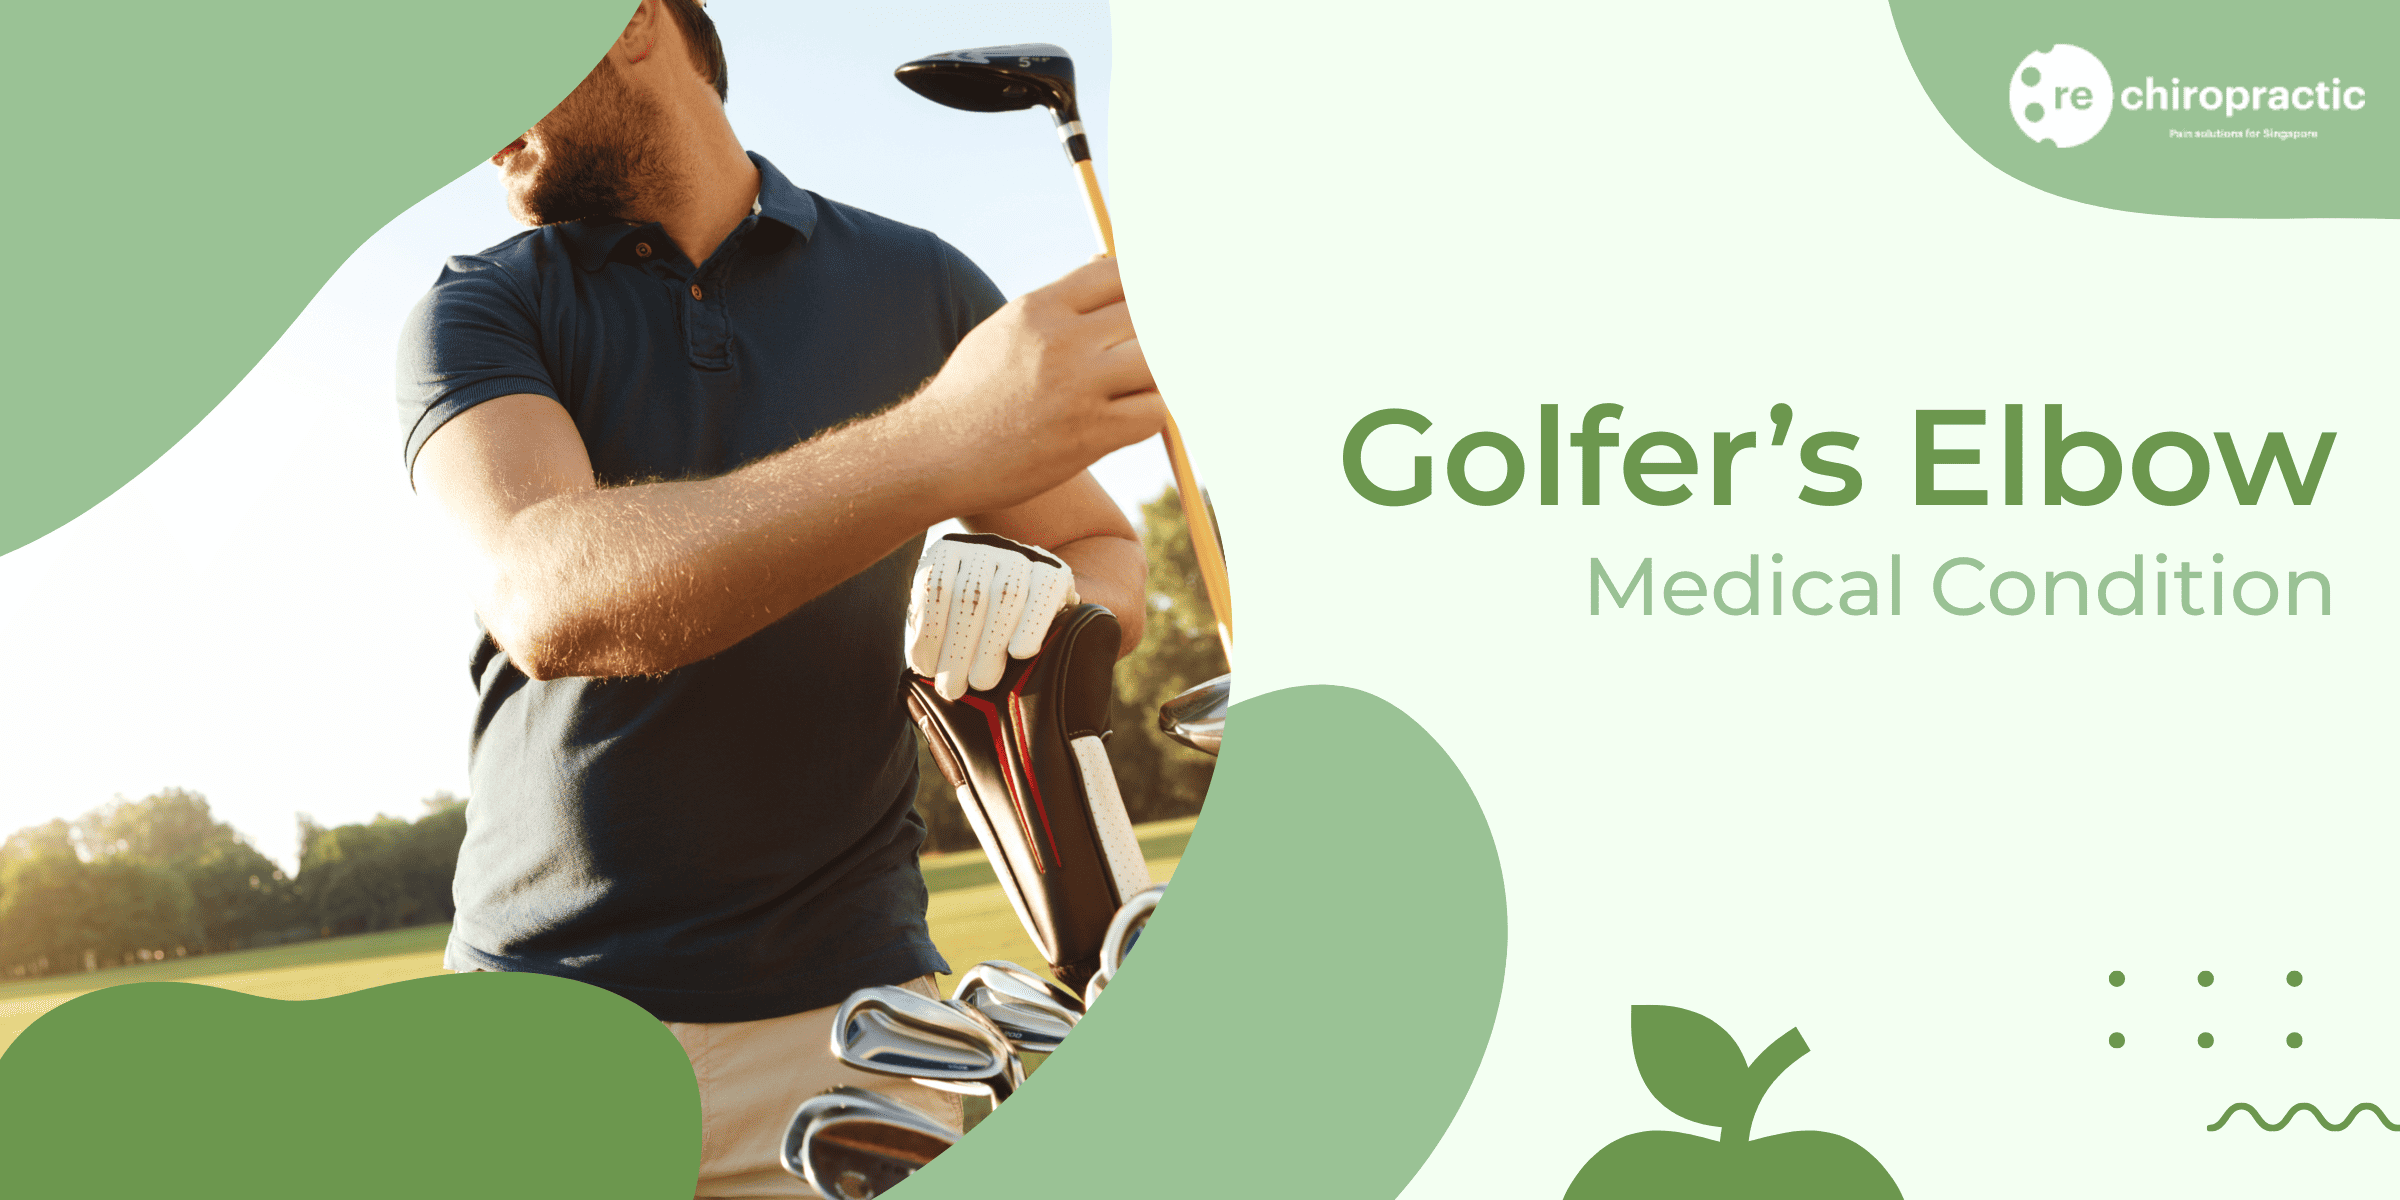 Golfer's Elbow: Causes, Symptoms, Self-Help & Chiropractic Treatments 1